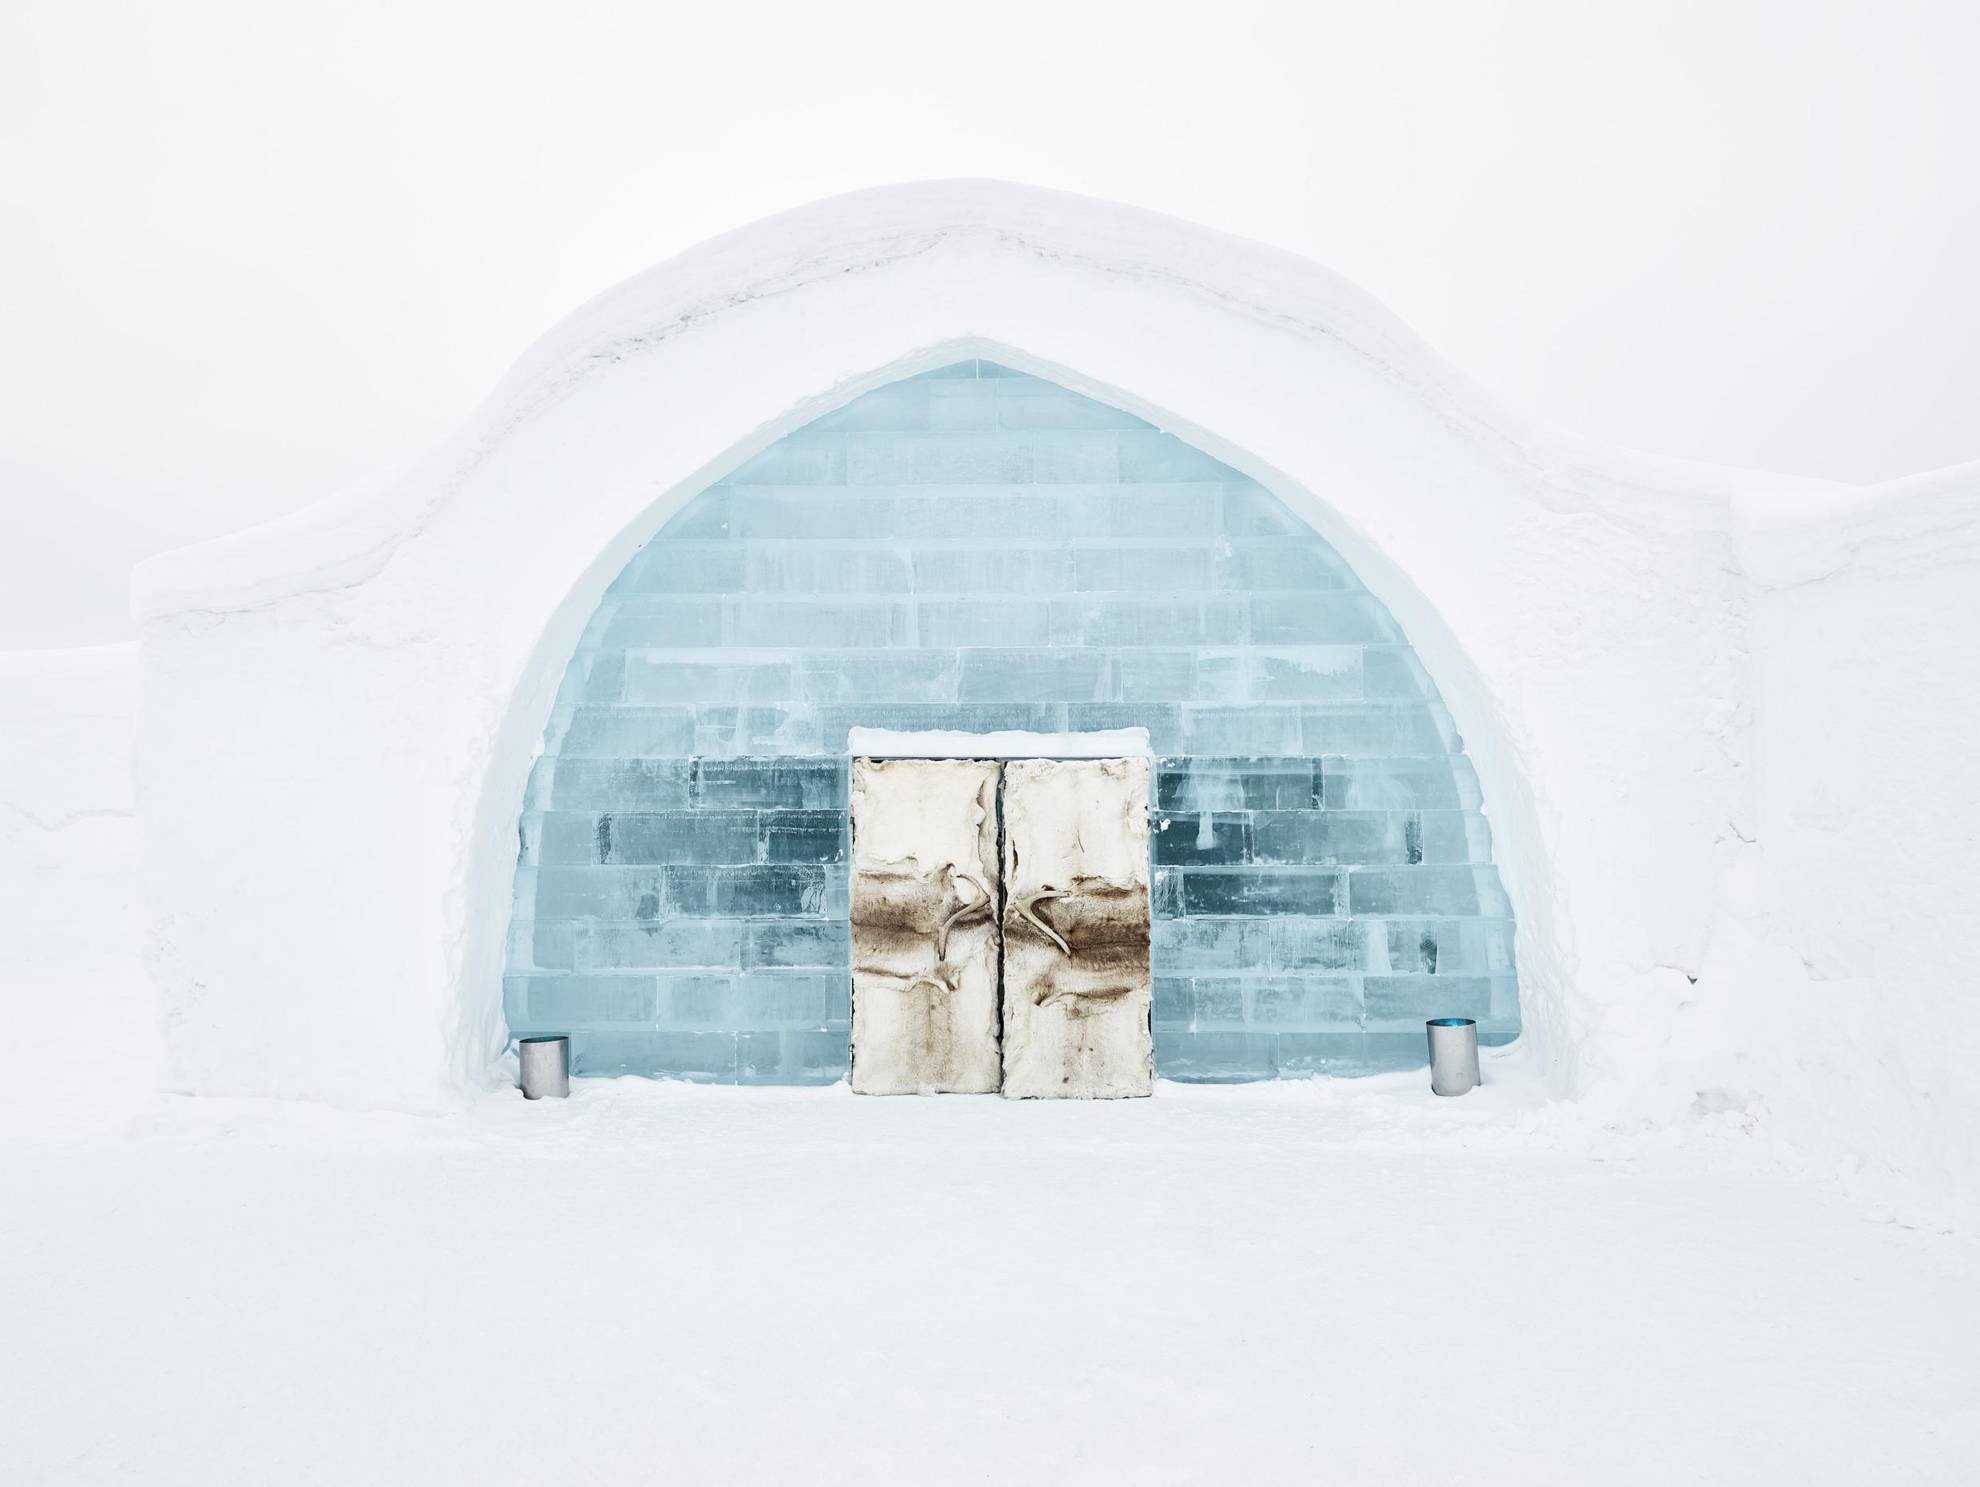 The entrance to the icehotel made of ice, packed snow , reindeer pelt and antlers.